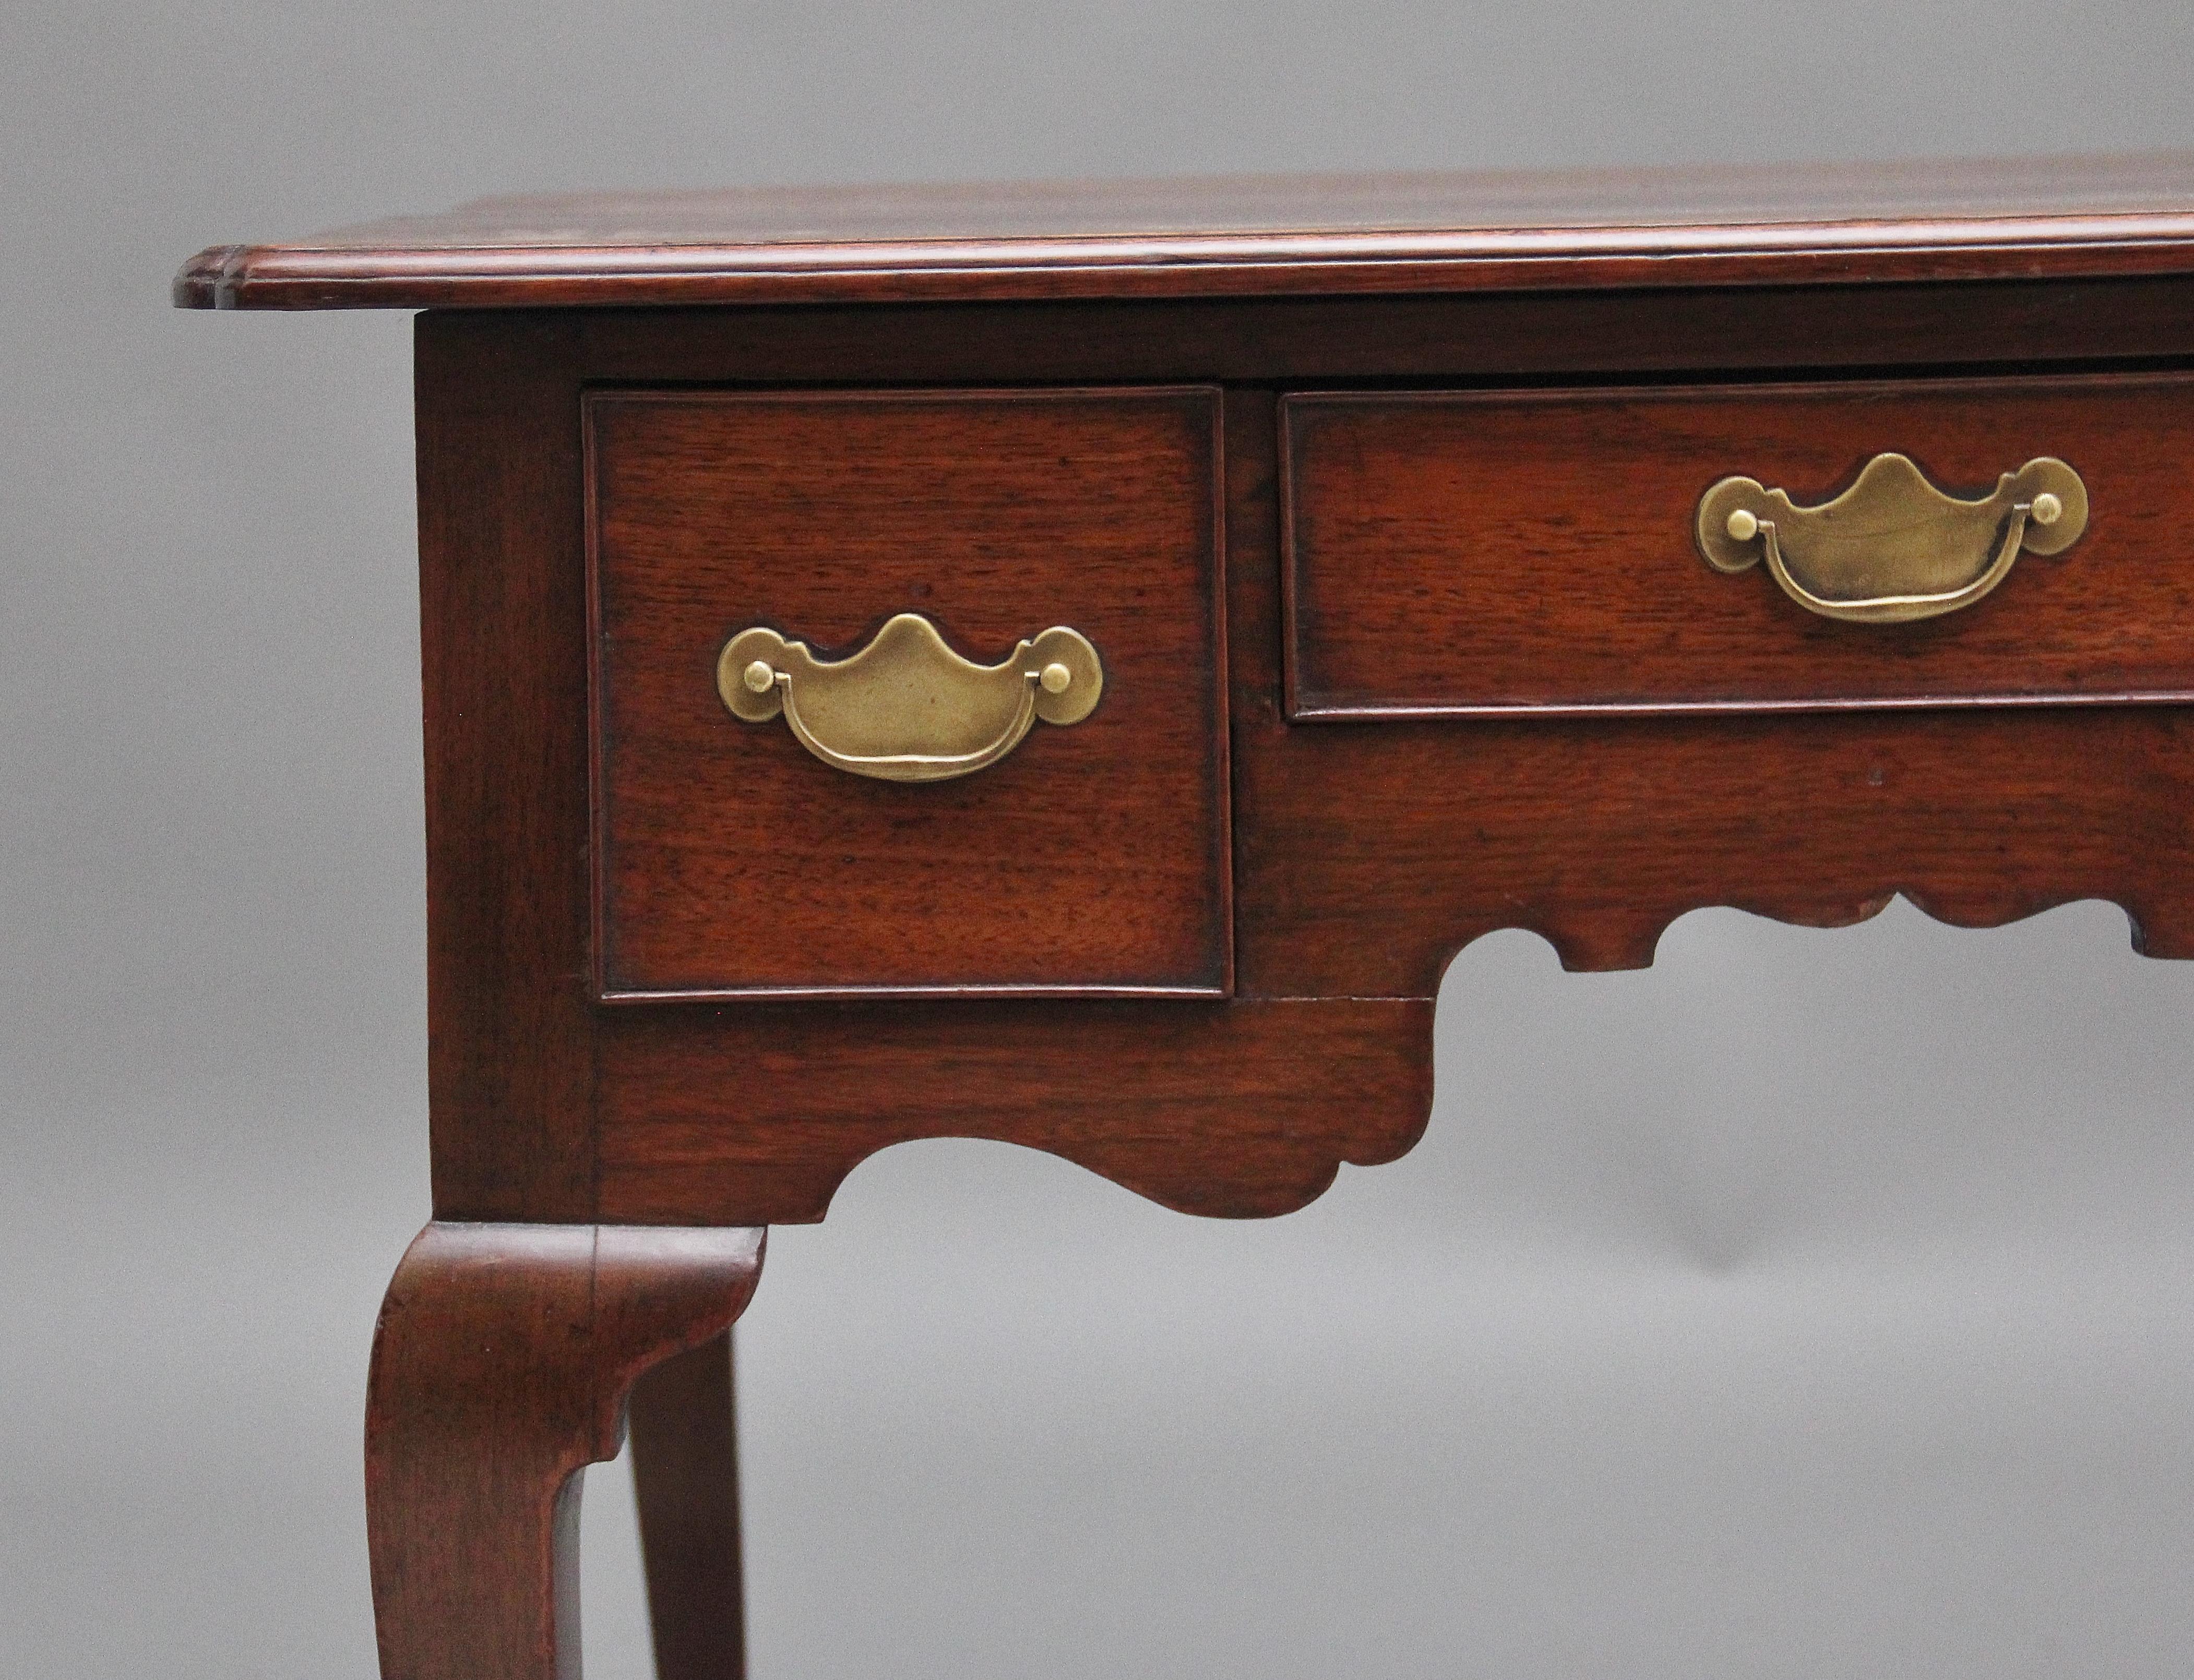 A lovely quality 18th Century walnut lowboy having a wonderful figured top with a thumb moulded edge and shaped corners, three oak lined drawers below with the original brass plate handles, highly decorative shaped apron to the front and sides and